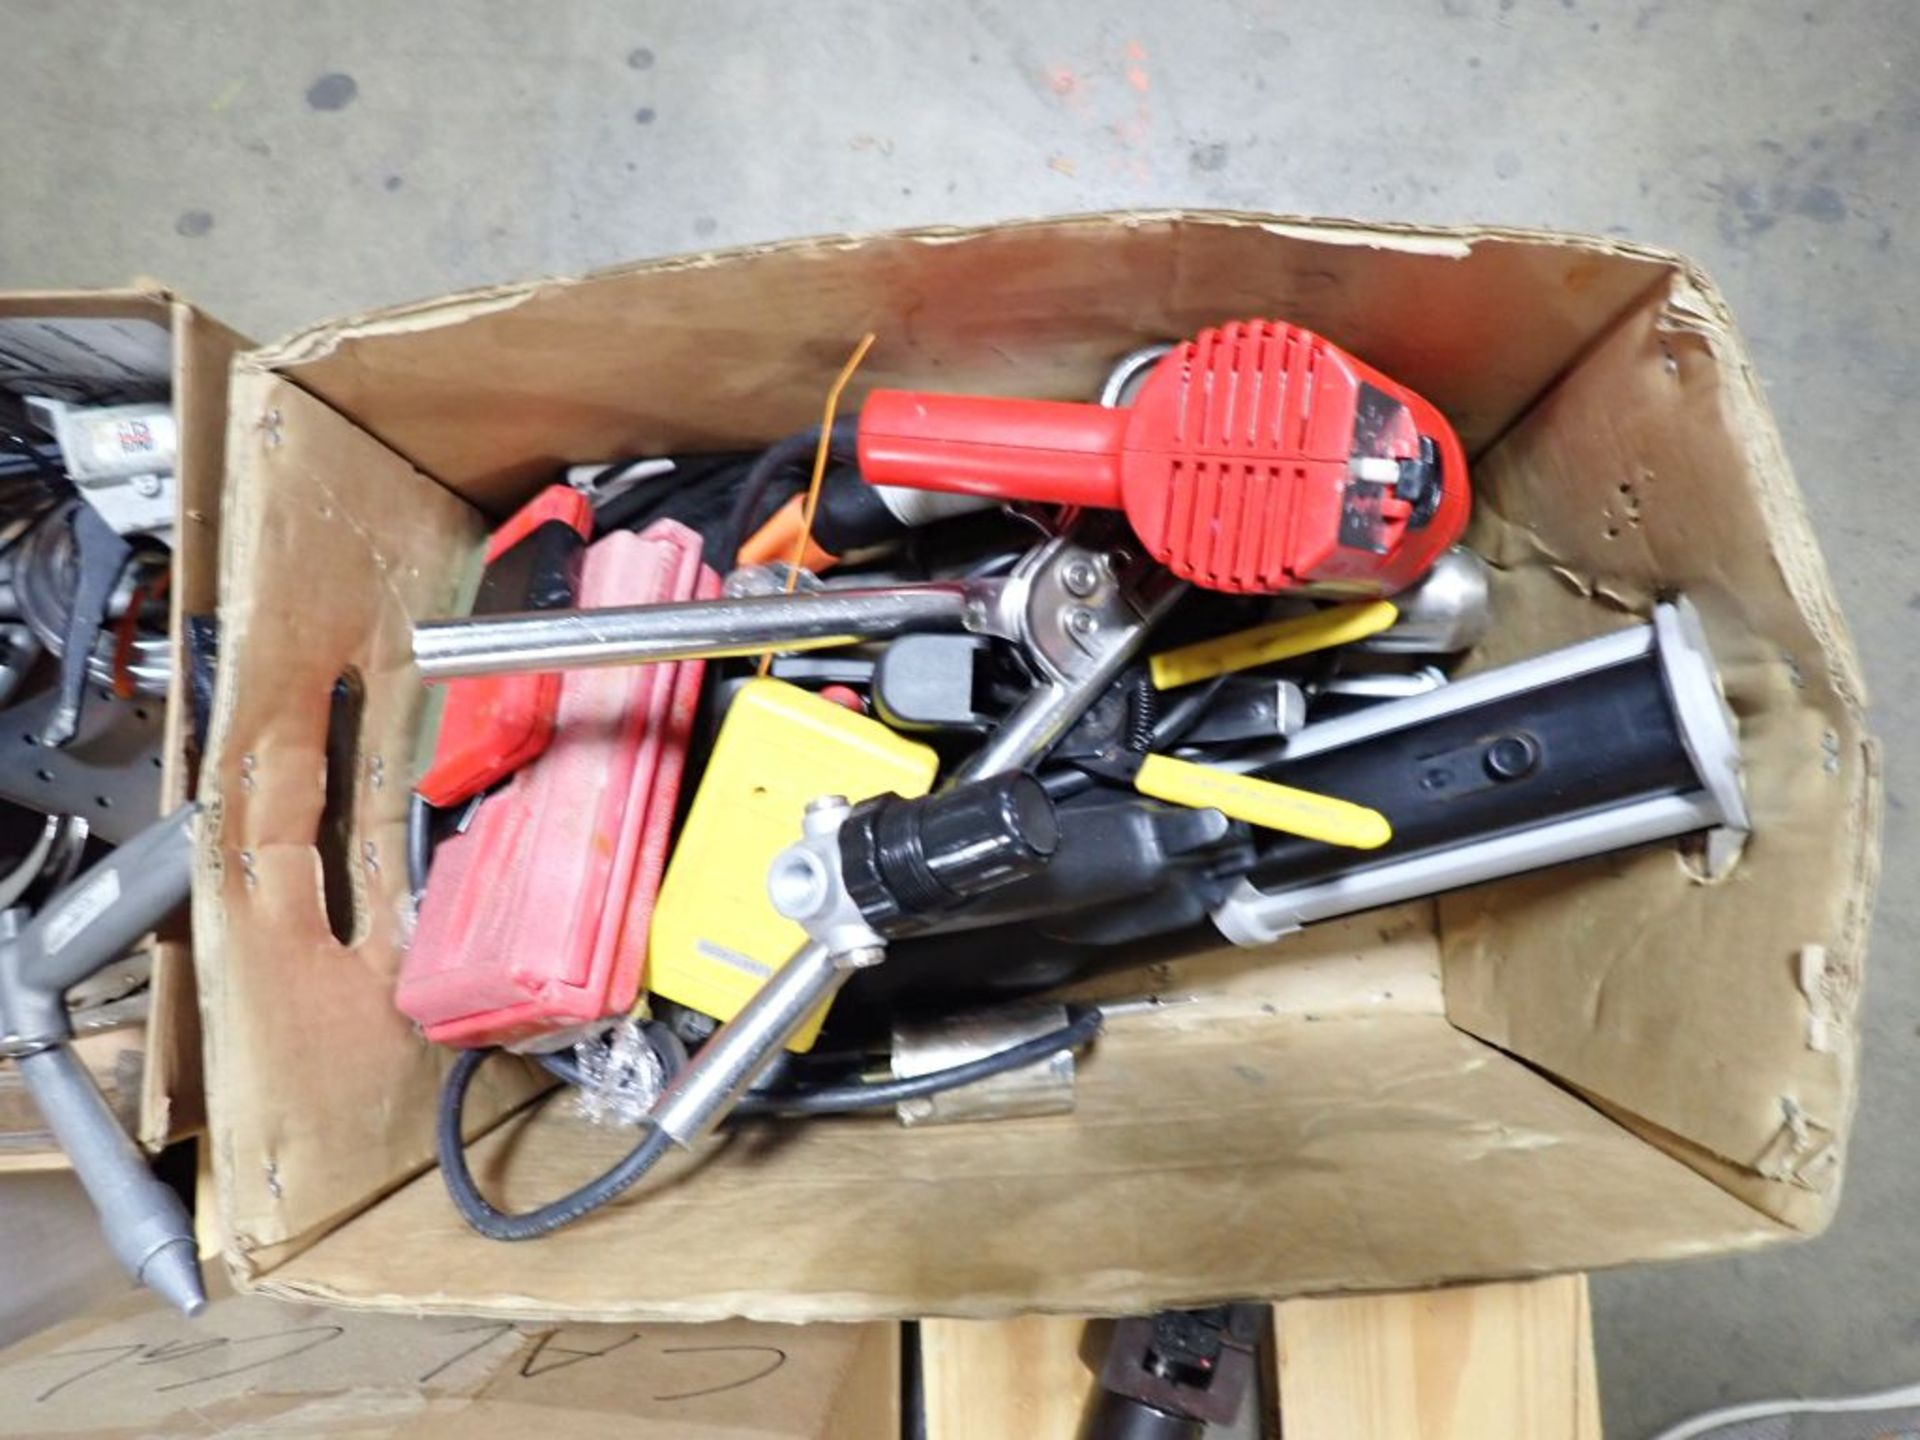 Lot of Assorted Tools | Tag: 241476 | Limited Forklift Assistance Available - $10.00 Lot Loading - Image 5 of 8